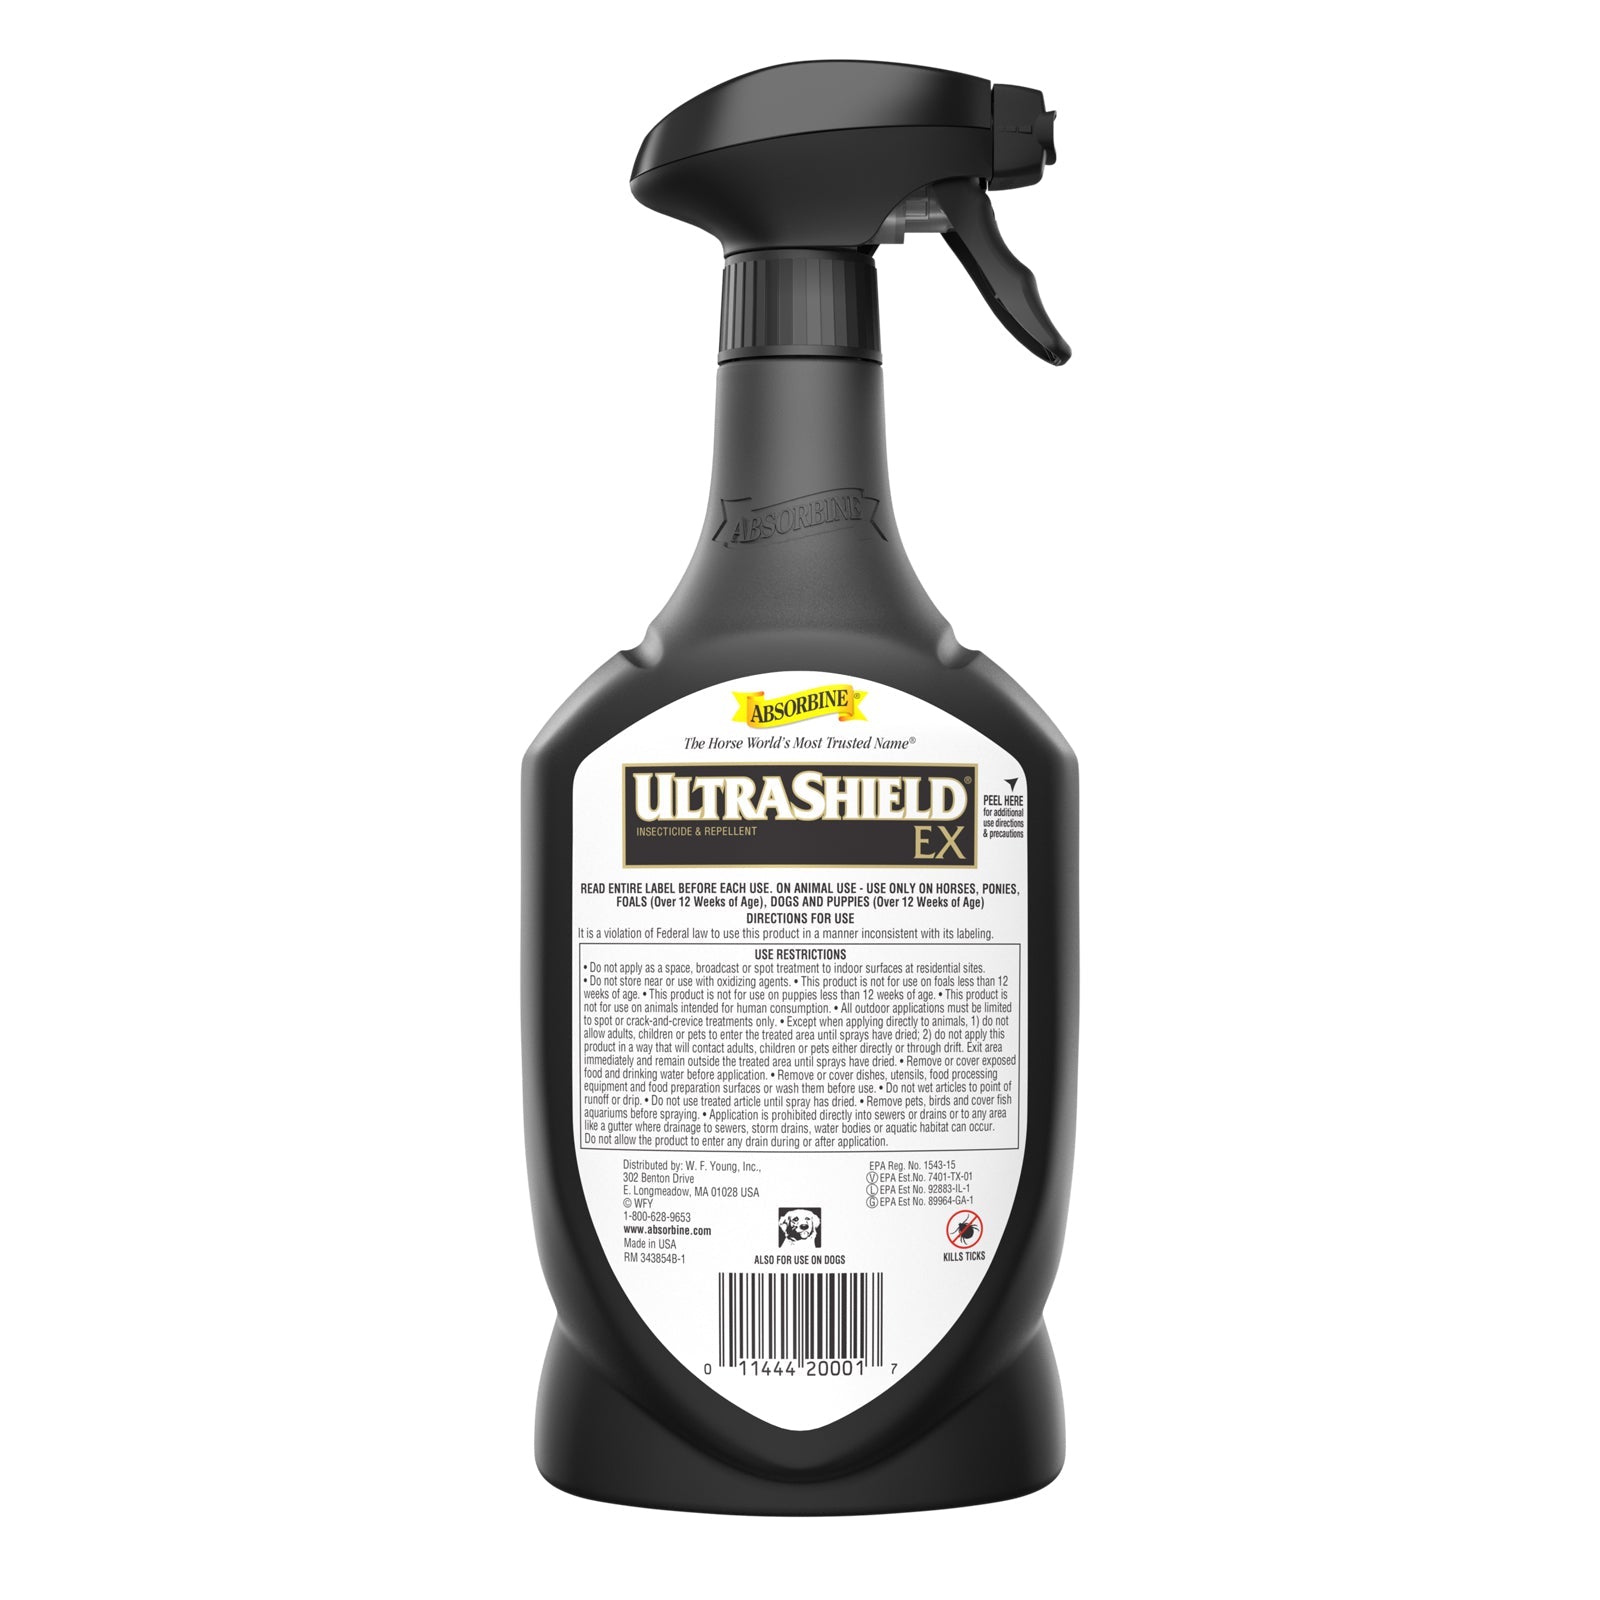 Absorbine Ultra Shield EX Insect &amp; Repel Spray